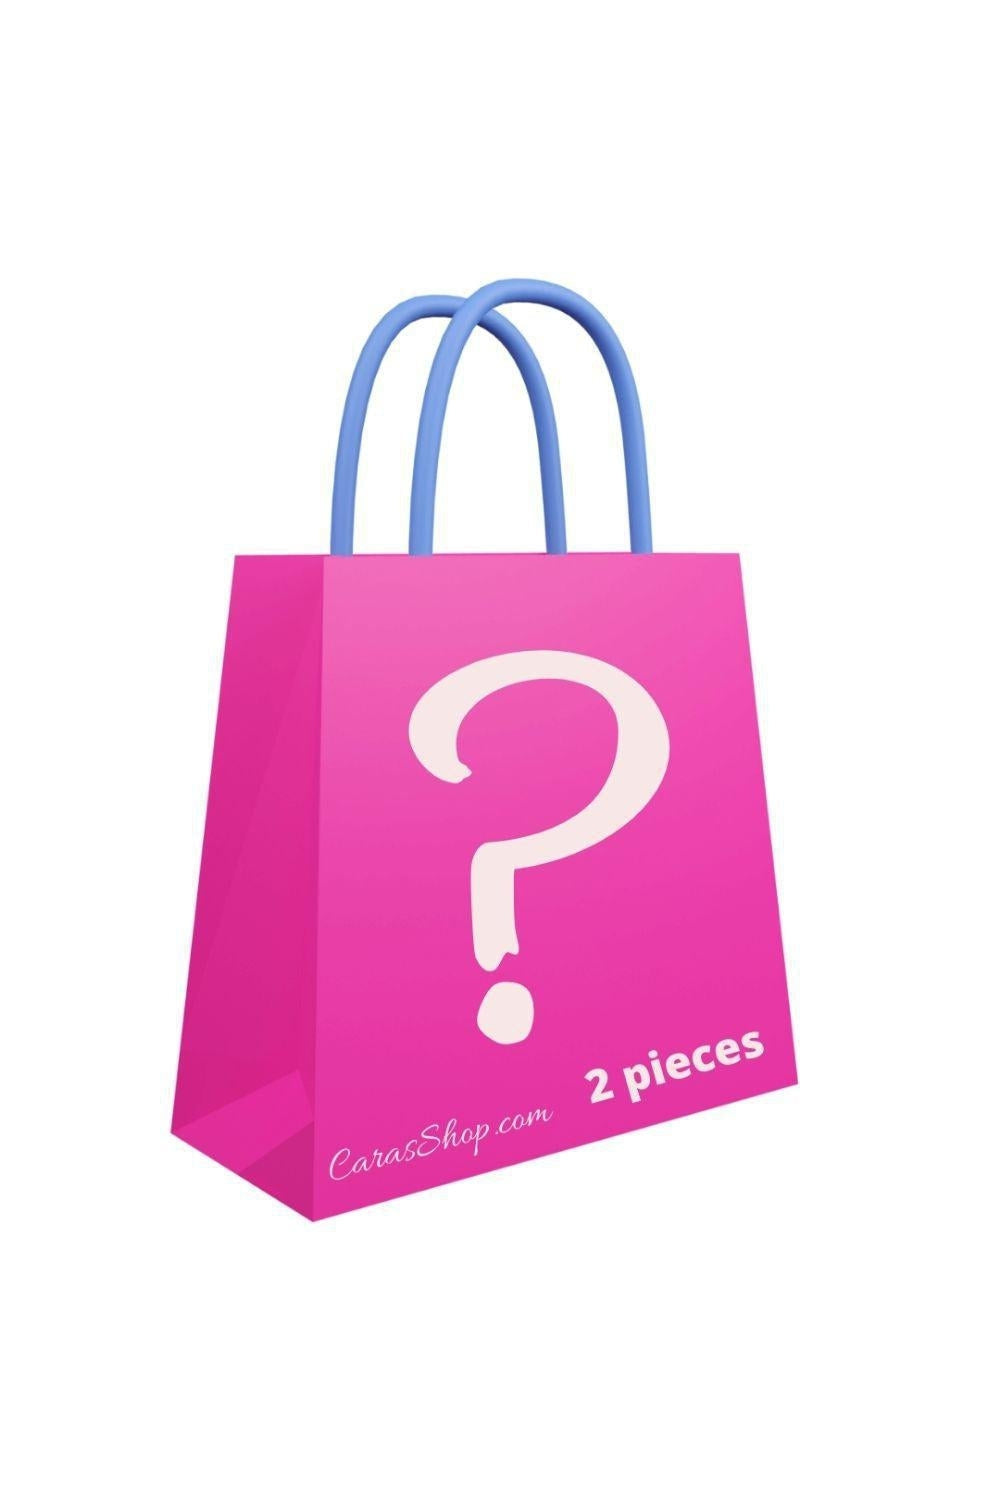 Specialty - Mystery Bags and Gift Cards-CarasShop.com - $5 Jewelry by Cara Jewels